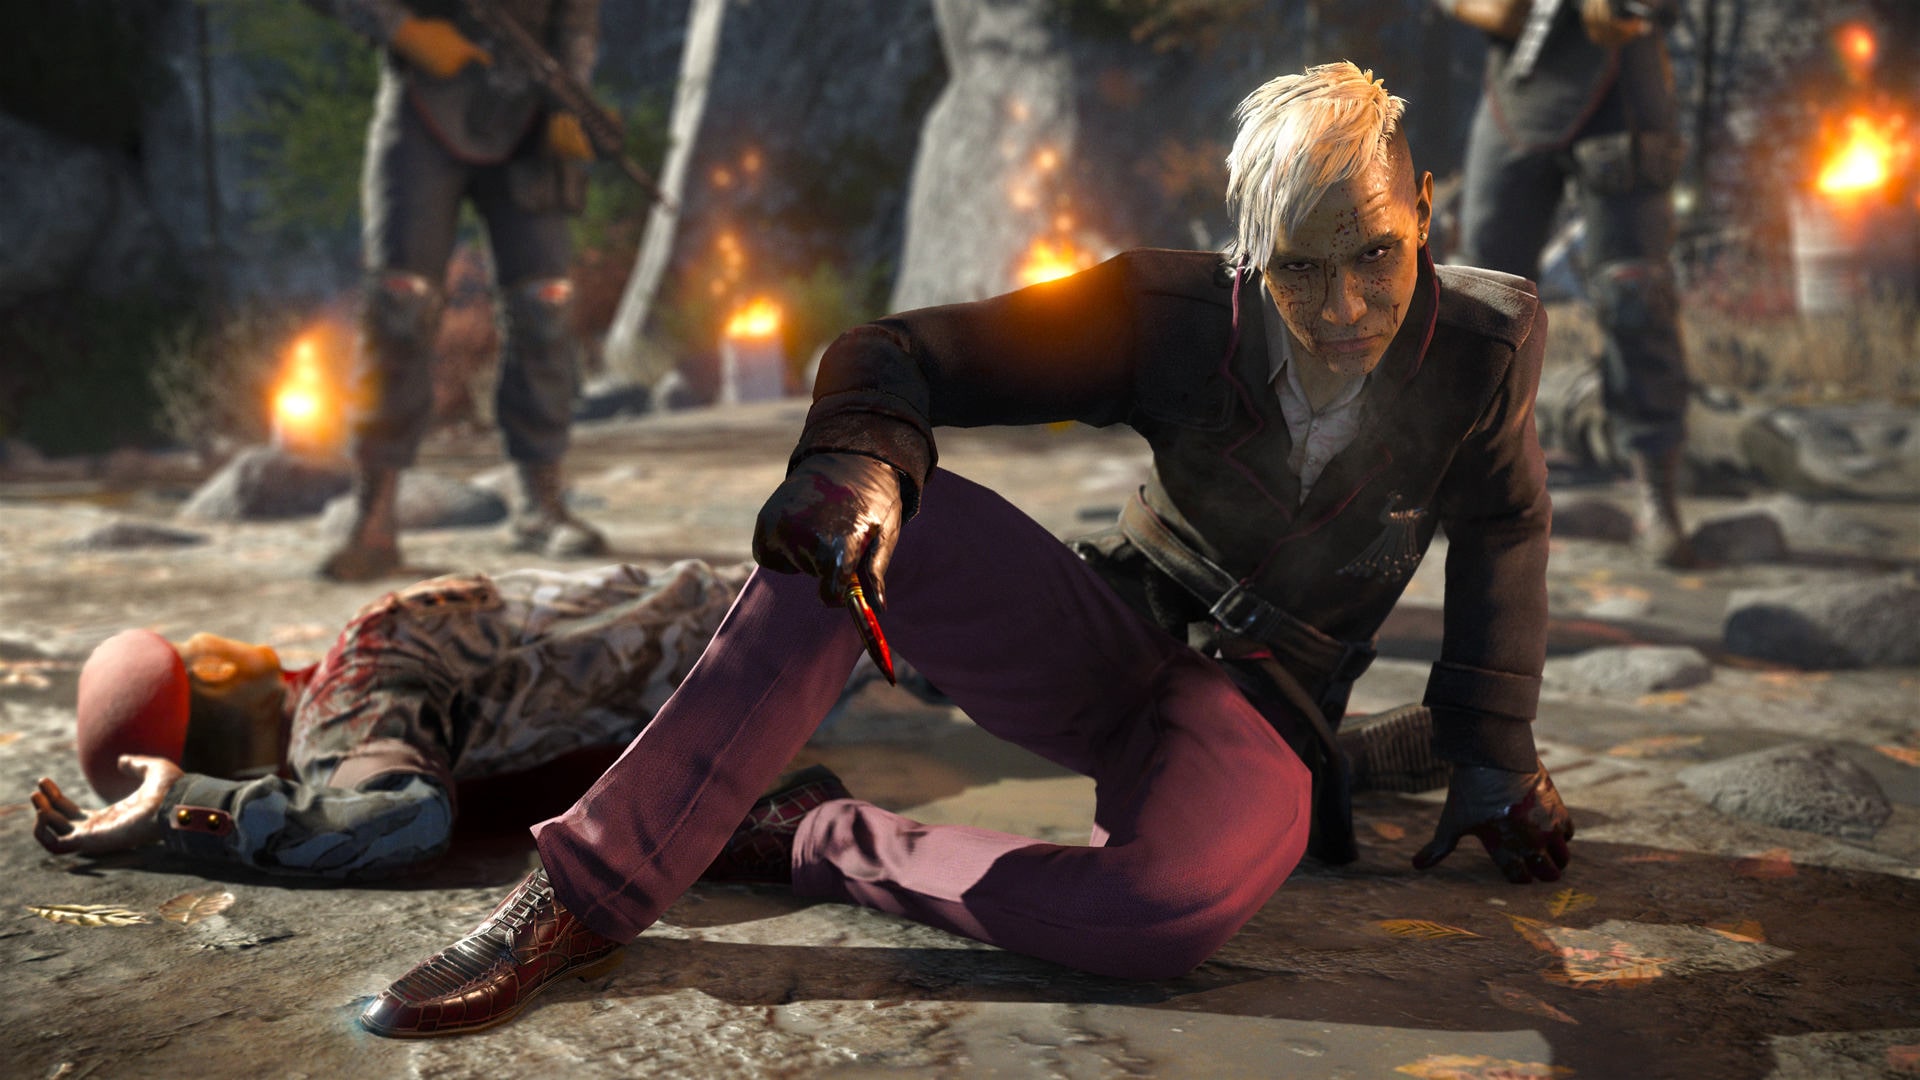 far cry 4 ps4 playstation store